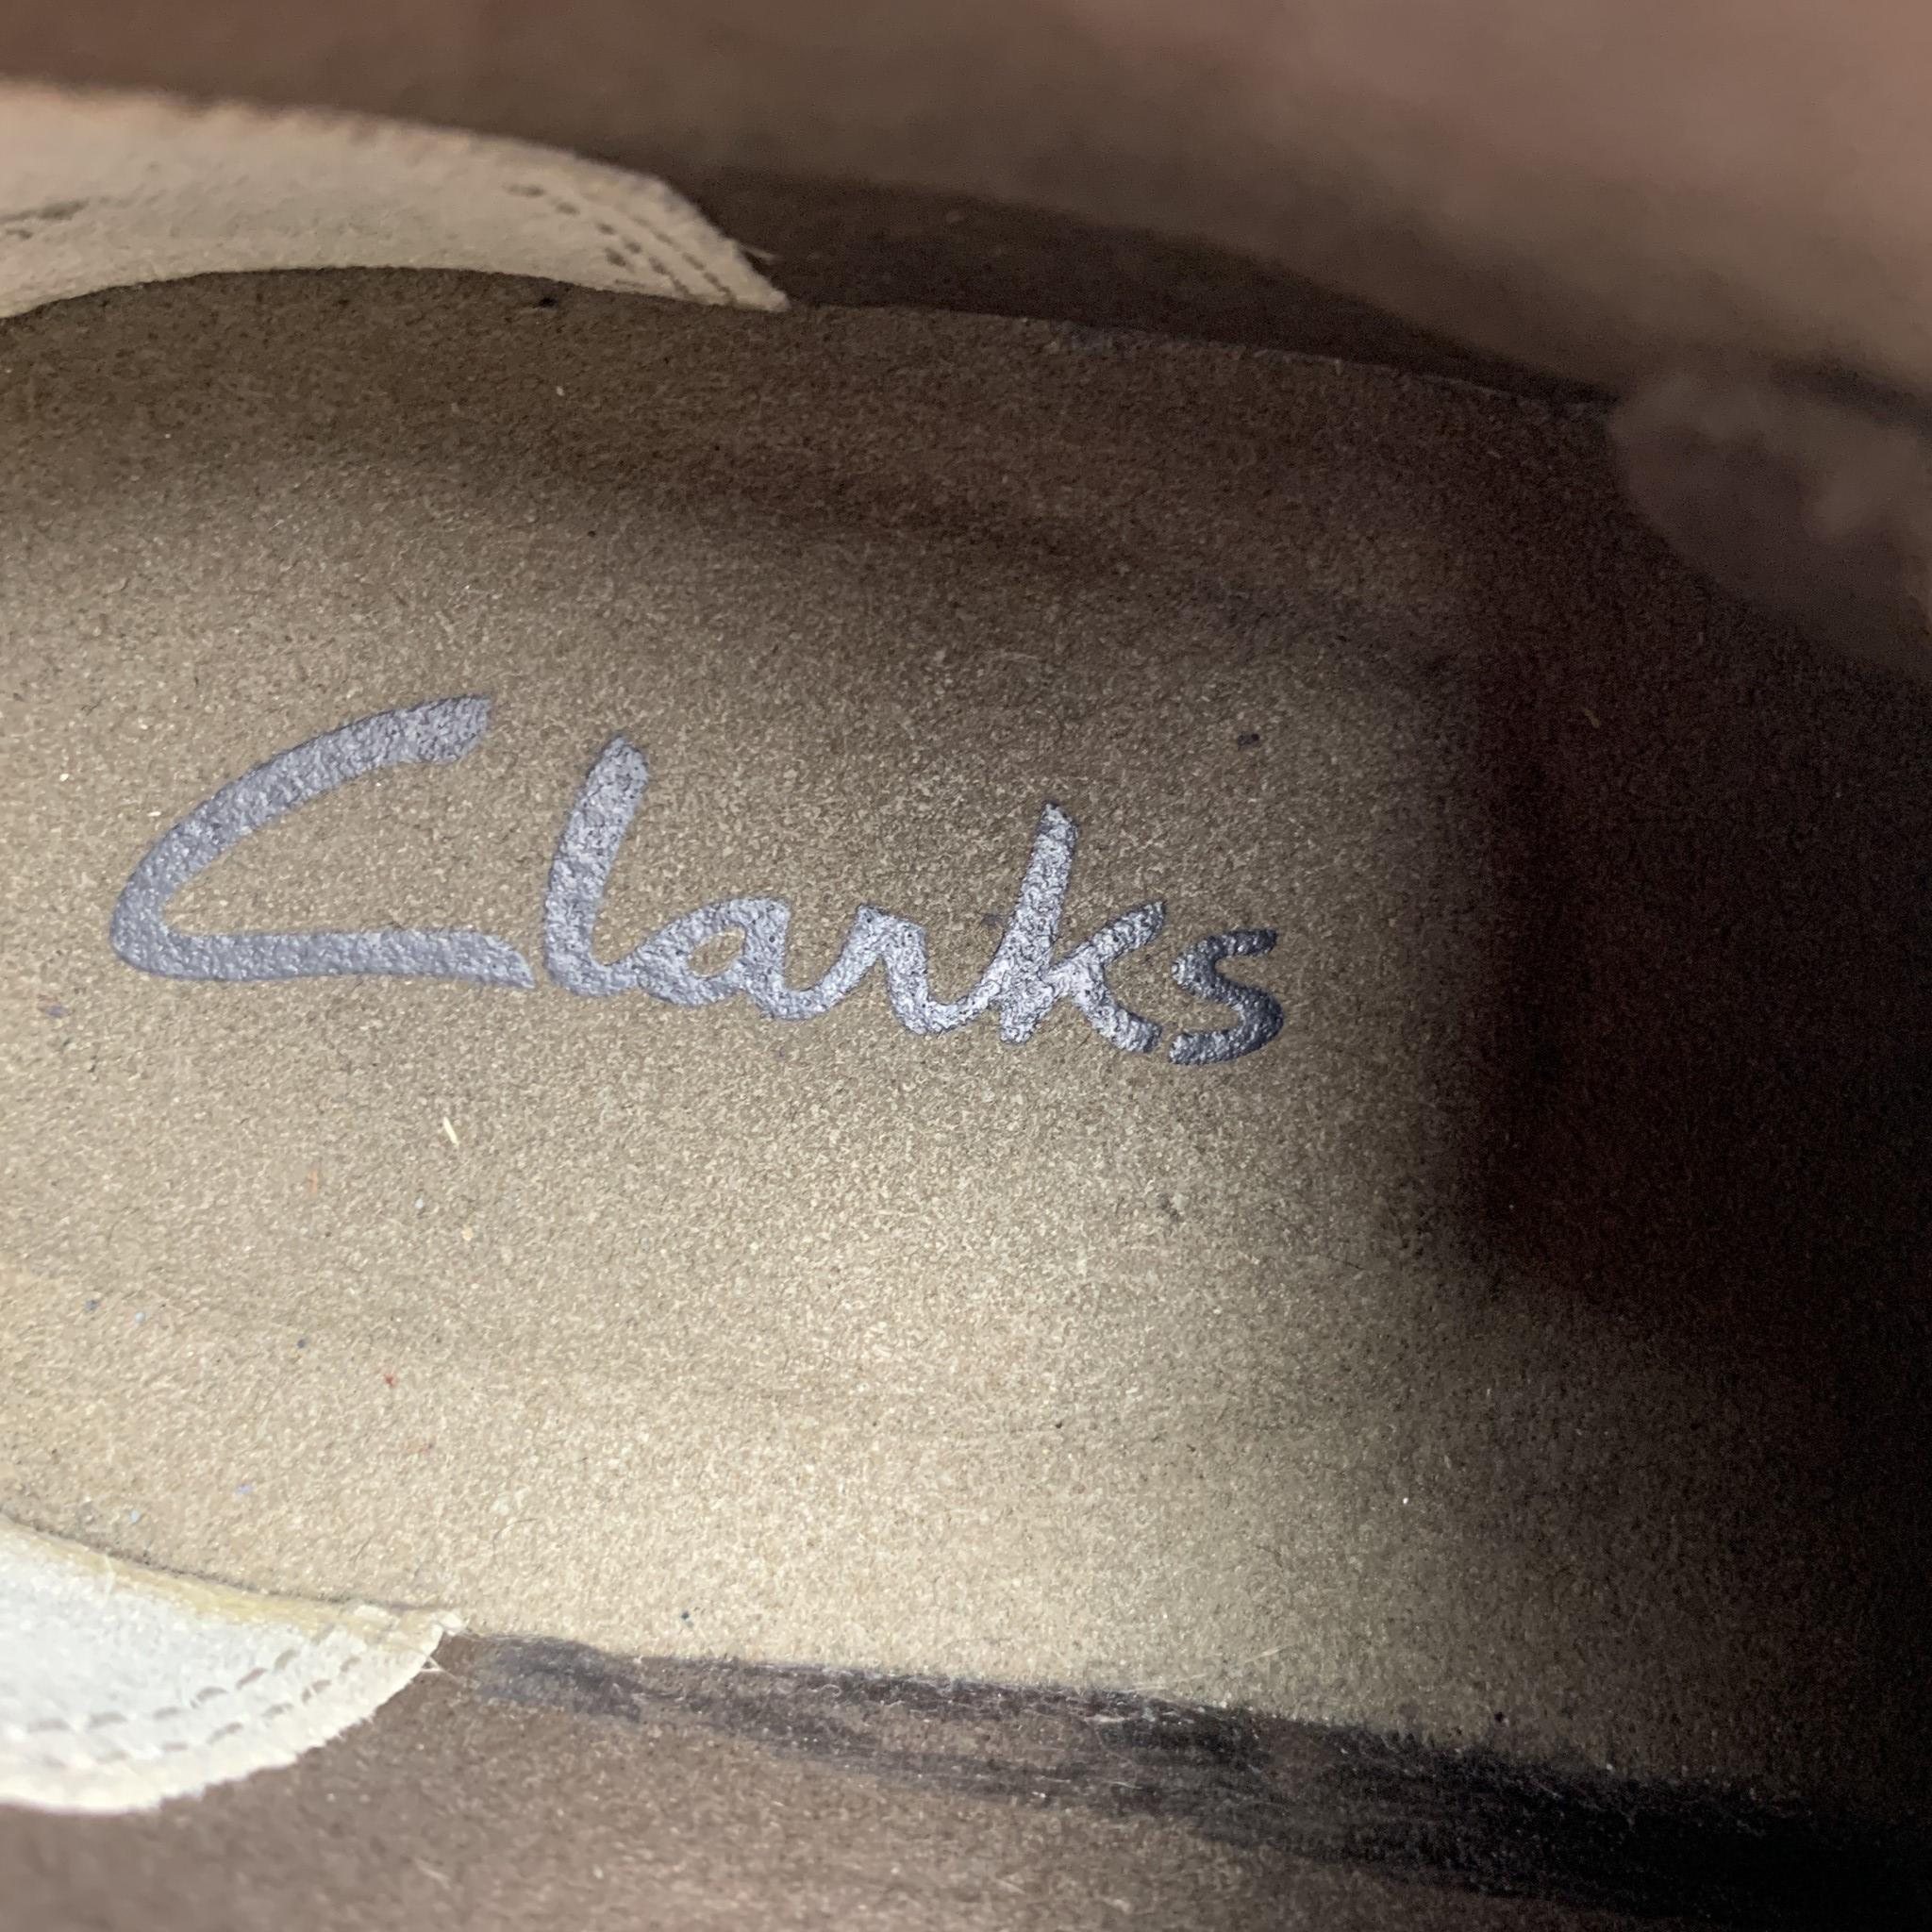 CLARKS Size 7 Taupe Suede Lace Up Chukka Boots 1